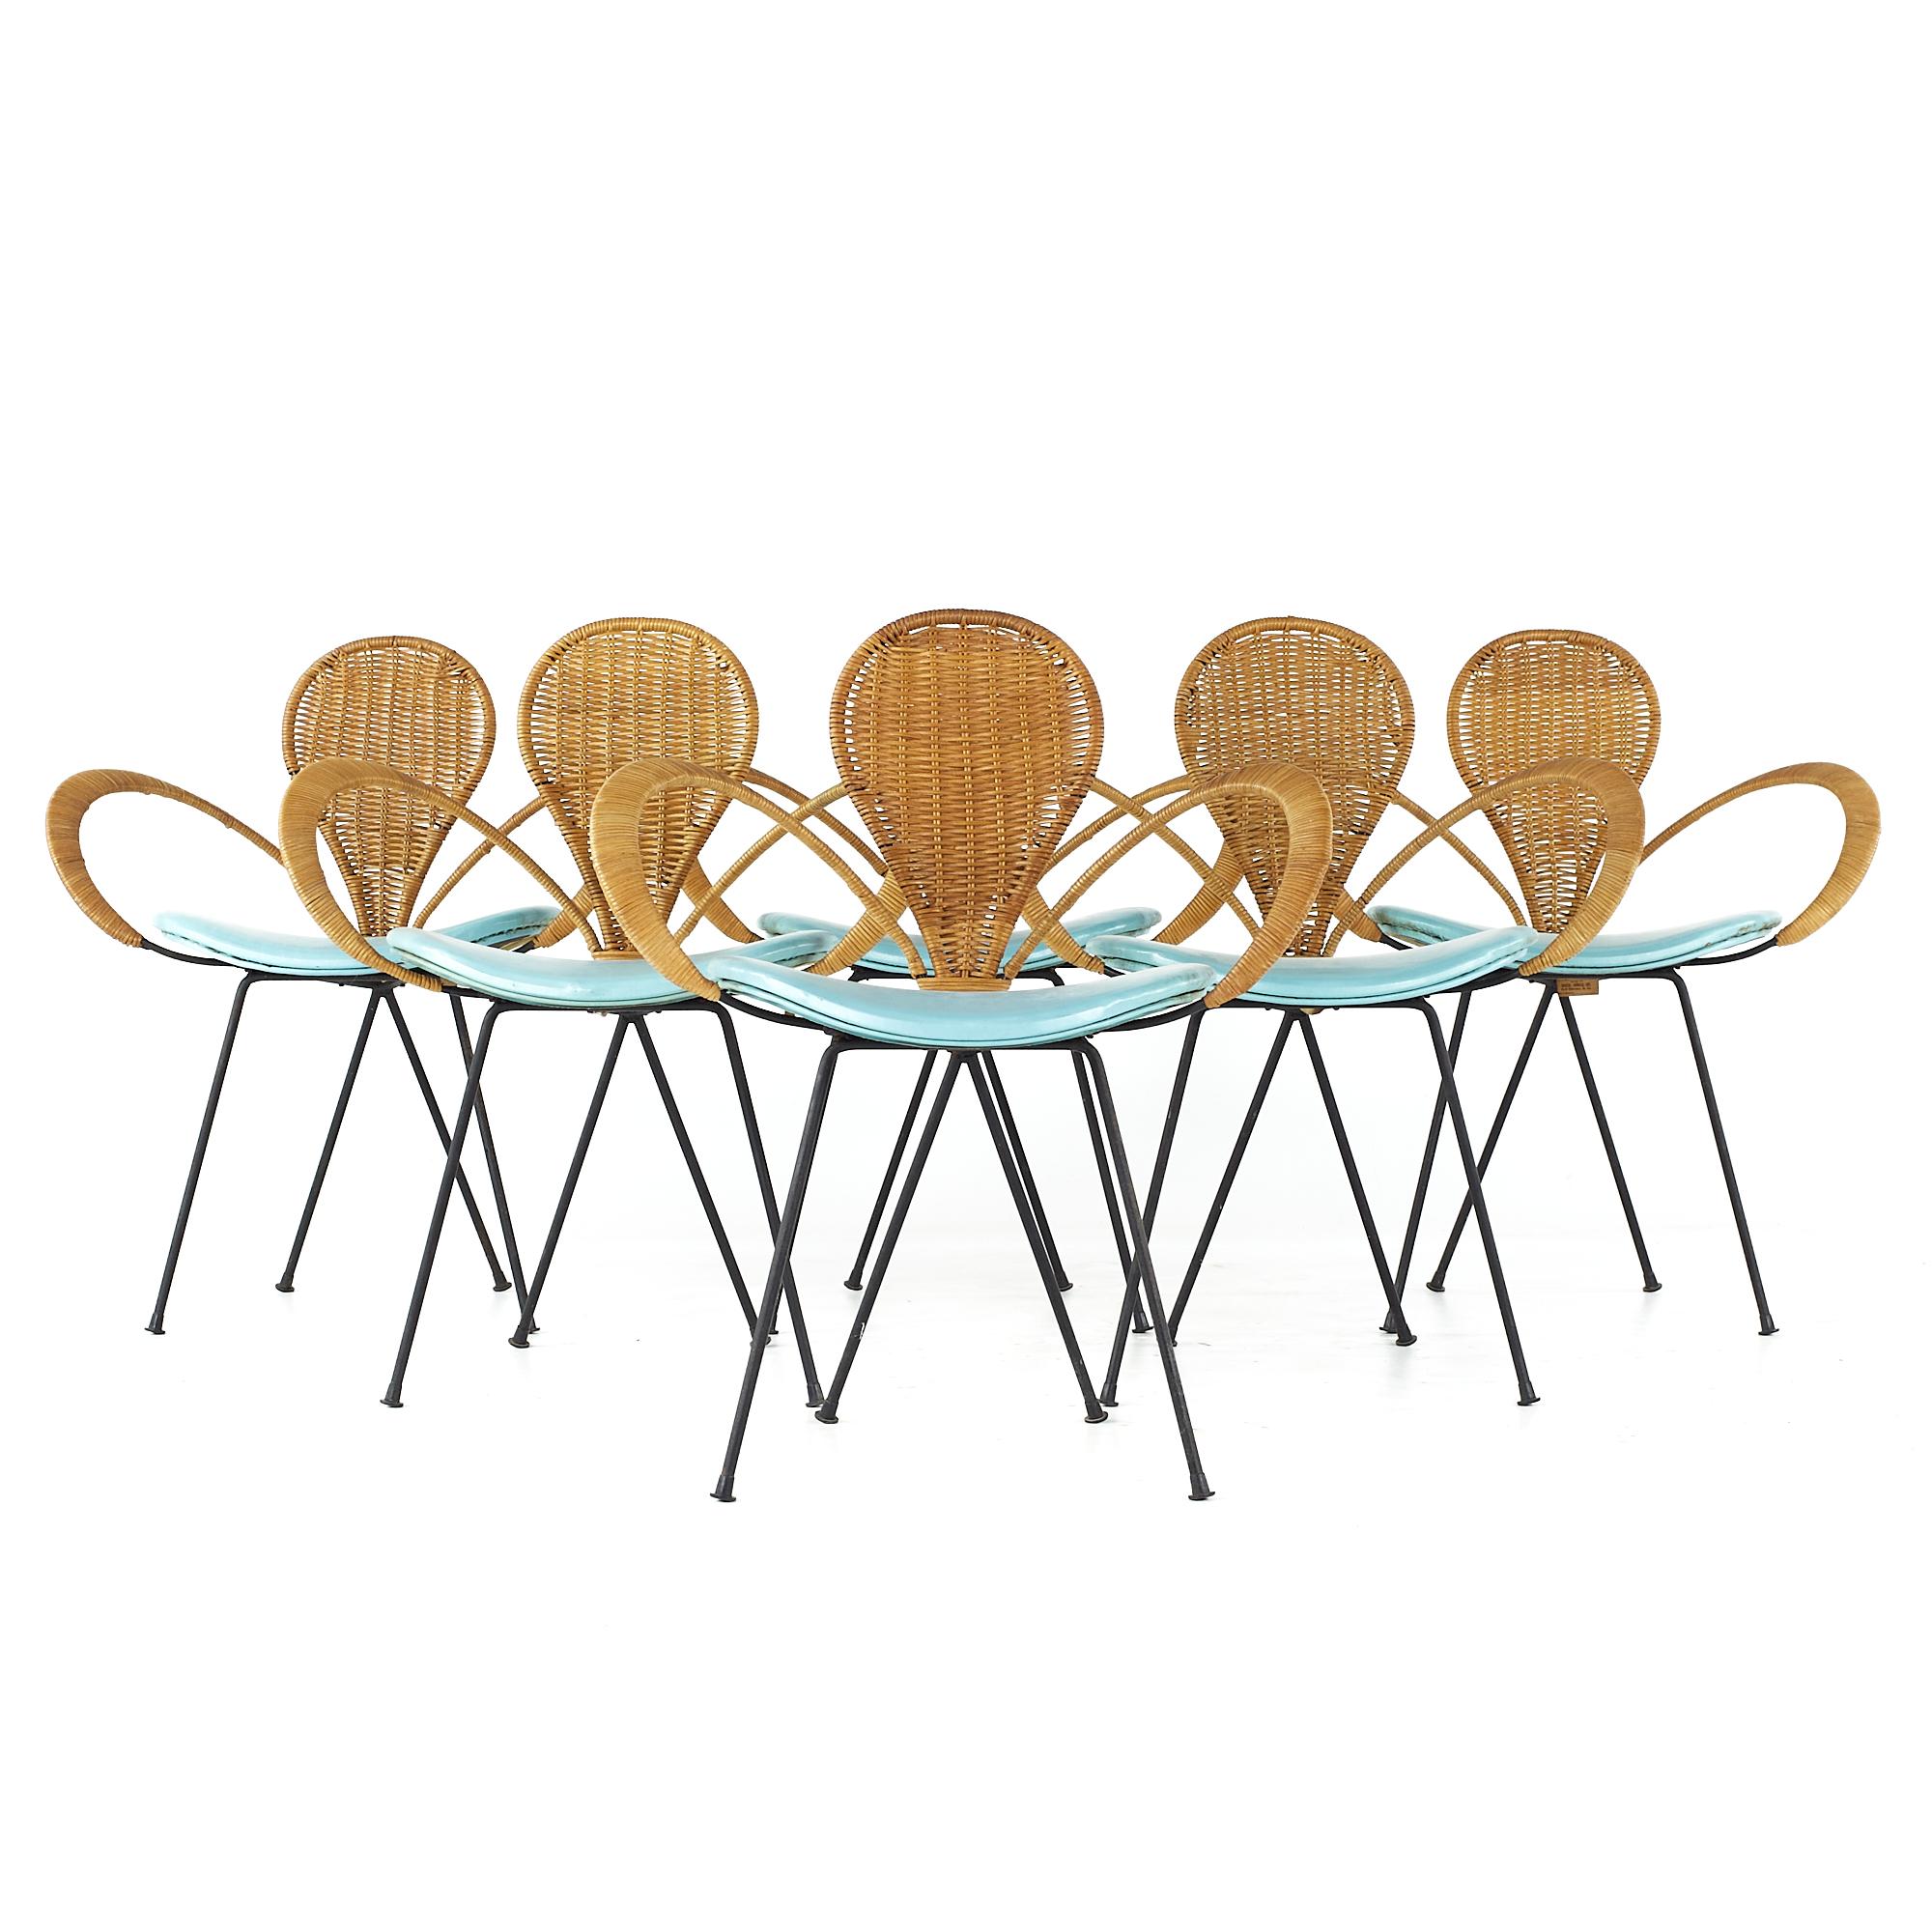 Arthur Umanoff for Shaver Howard MCM Rattan and iron dining chairs - set of 6

Each chair measures: 26.75 wide x 19 deep x 32 inches high, with a seat height of 17.5 and arm height/chair clearance of 26.5 inches

All pieces of furniture can be